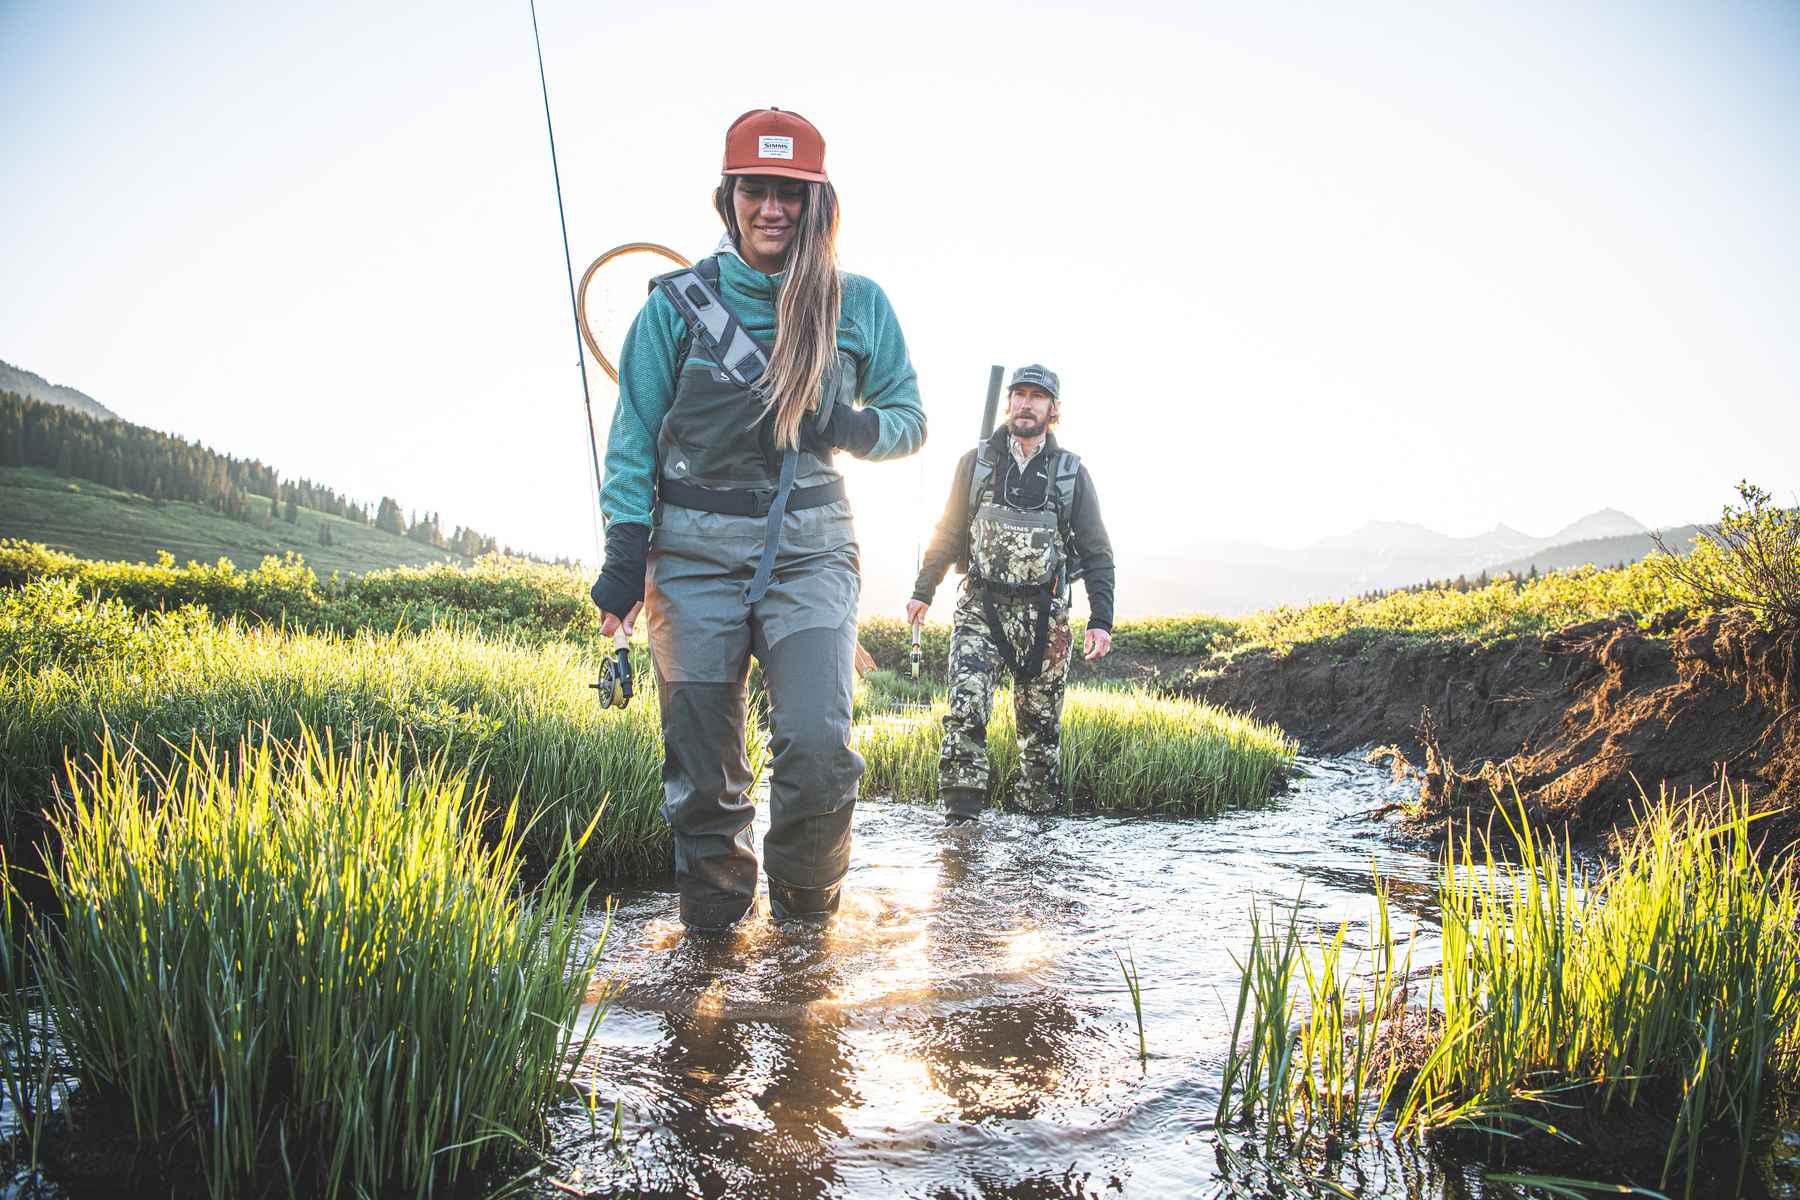 http://www.hatchmag.com/sites/default/files/styles/extra-large/public/field/image/SimmsFishing_BachaPhoto_G3_Telluride_0108.JPG